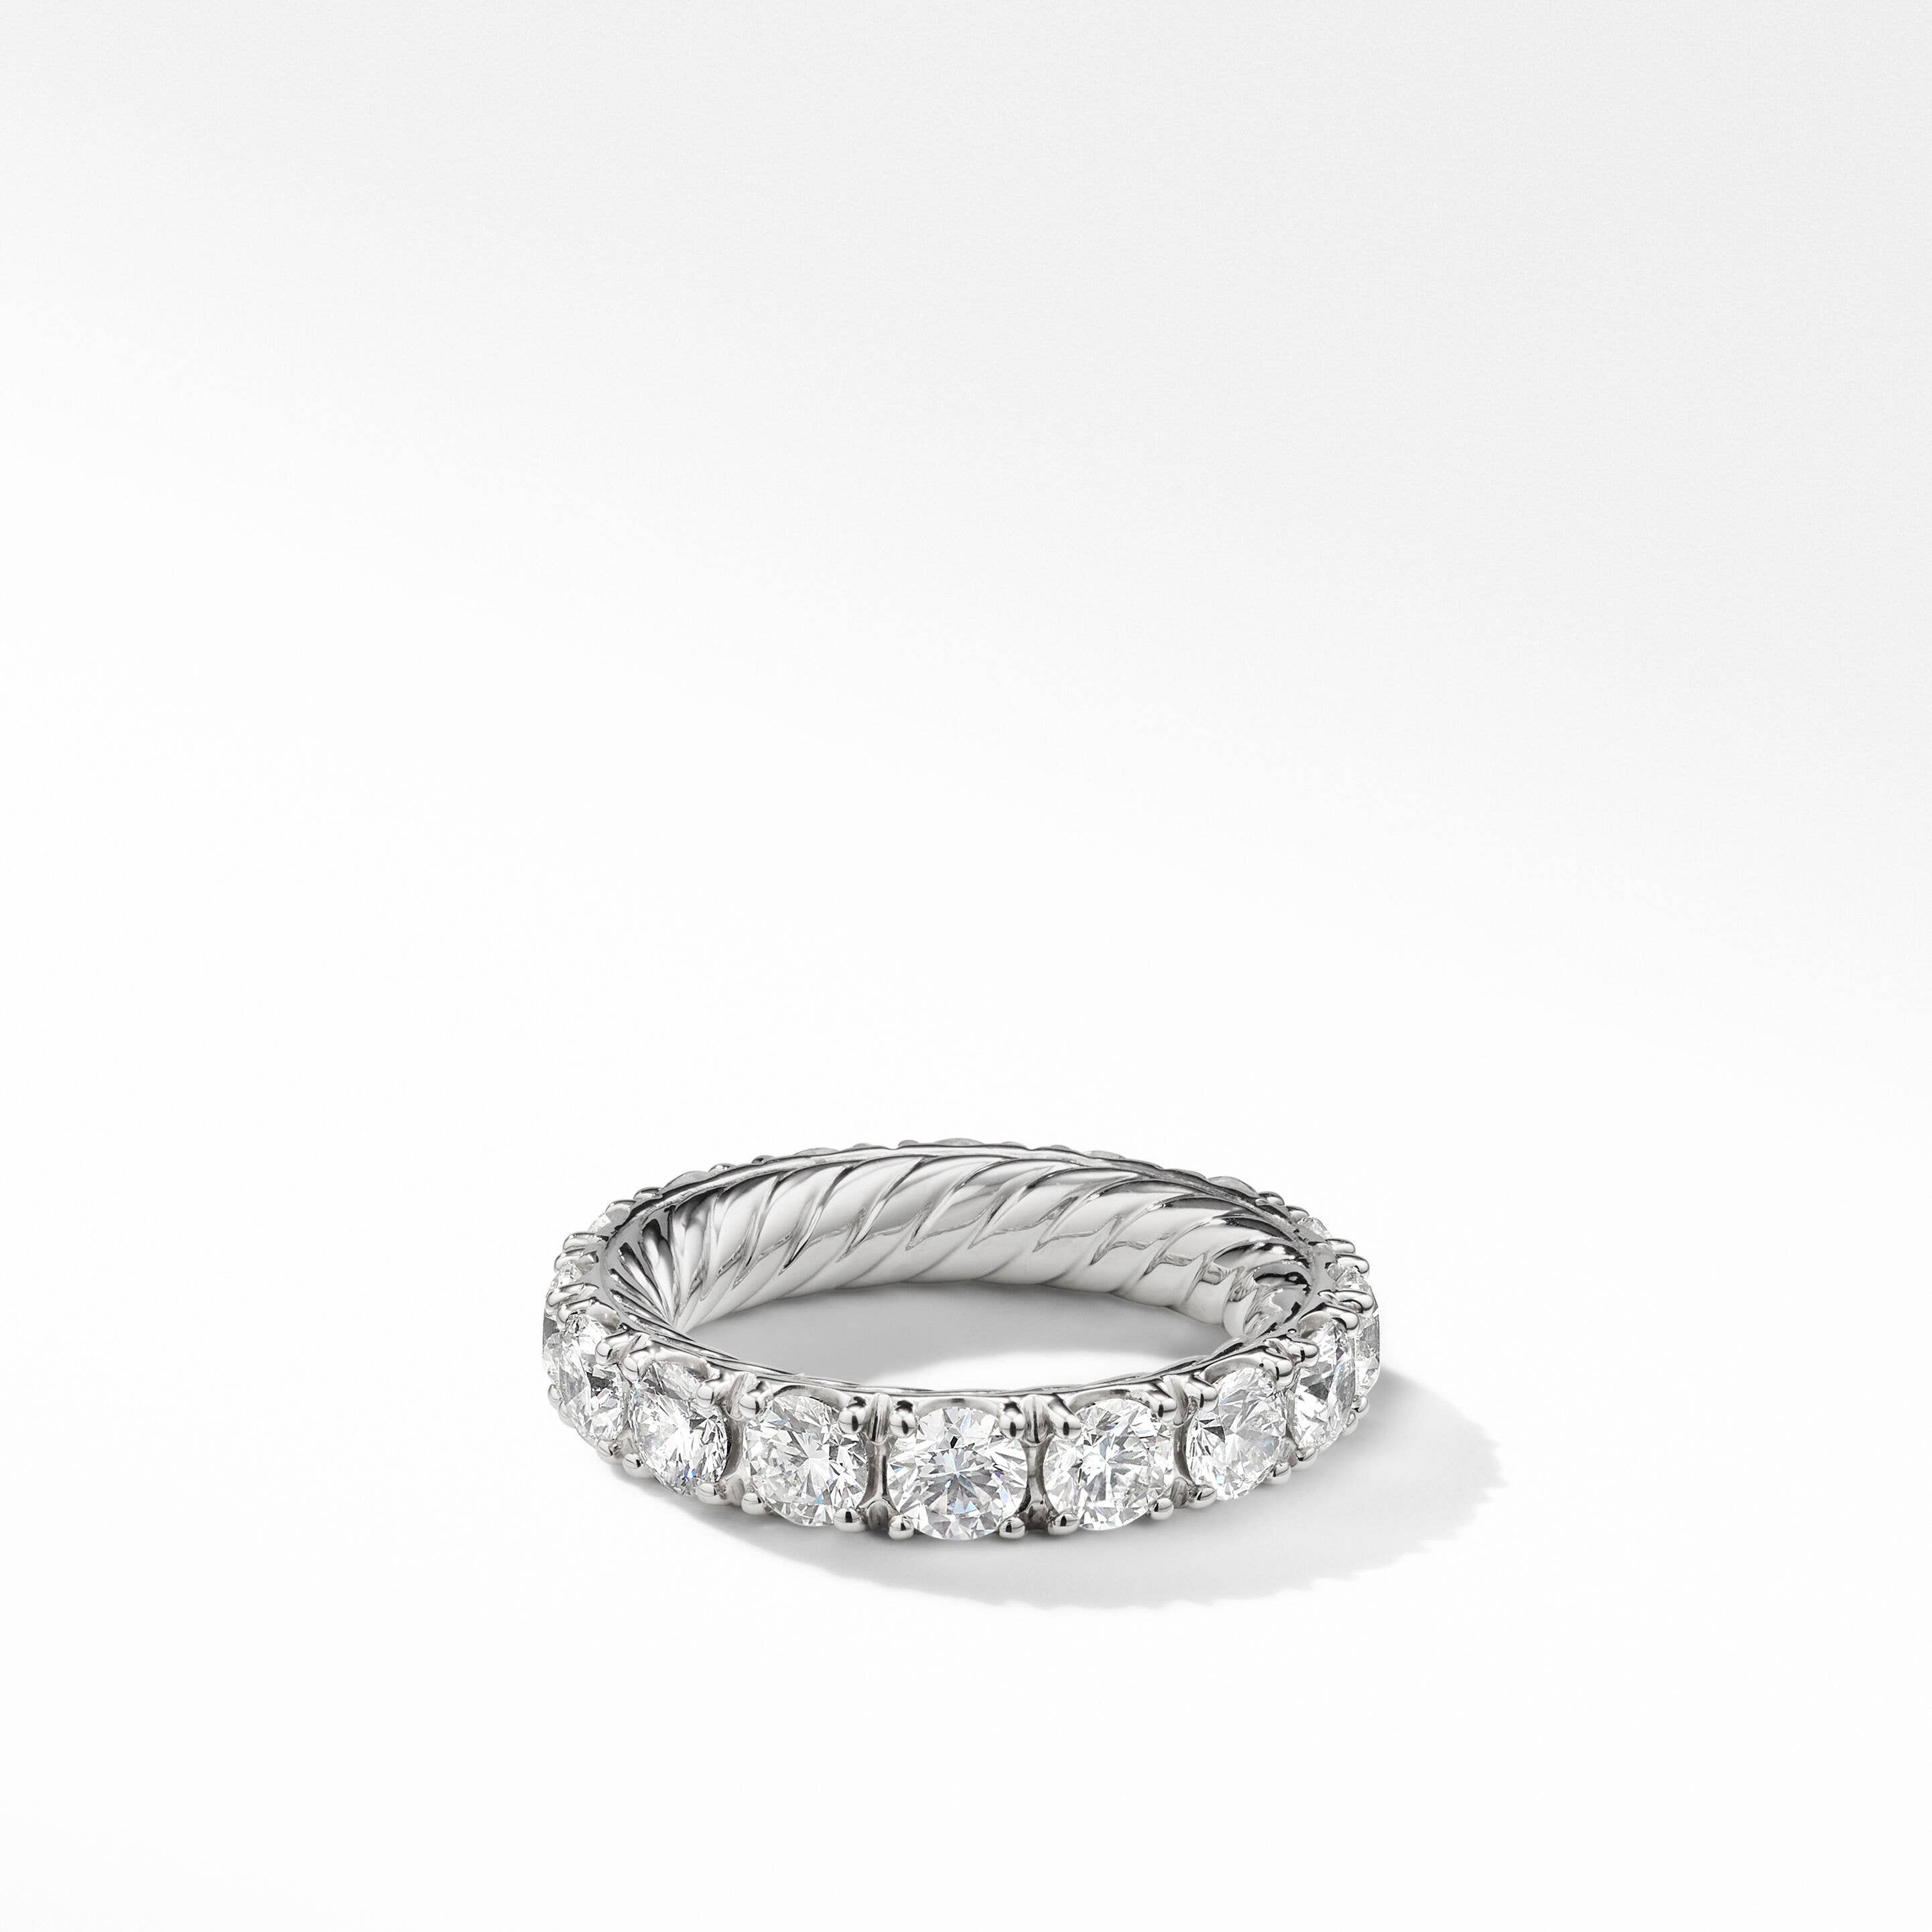 DY Eden Eternity Band Ring in Platinum with Diamonds